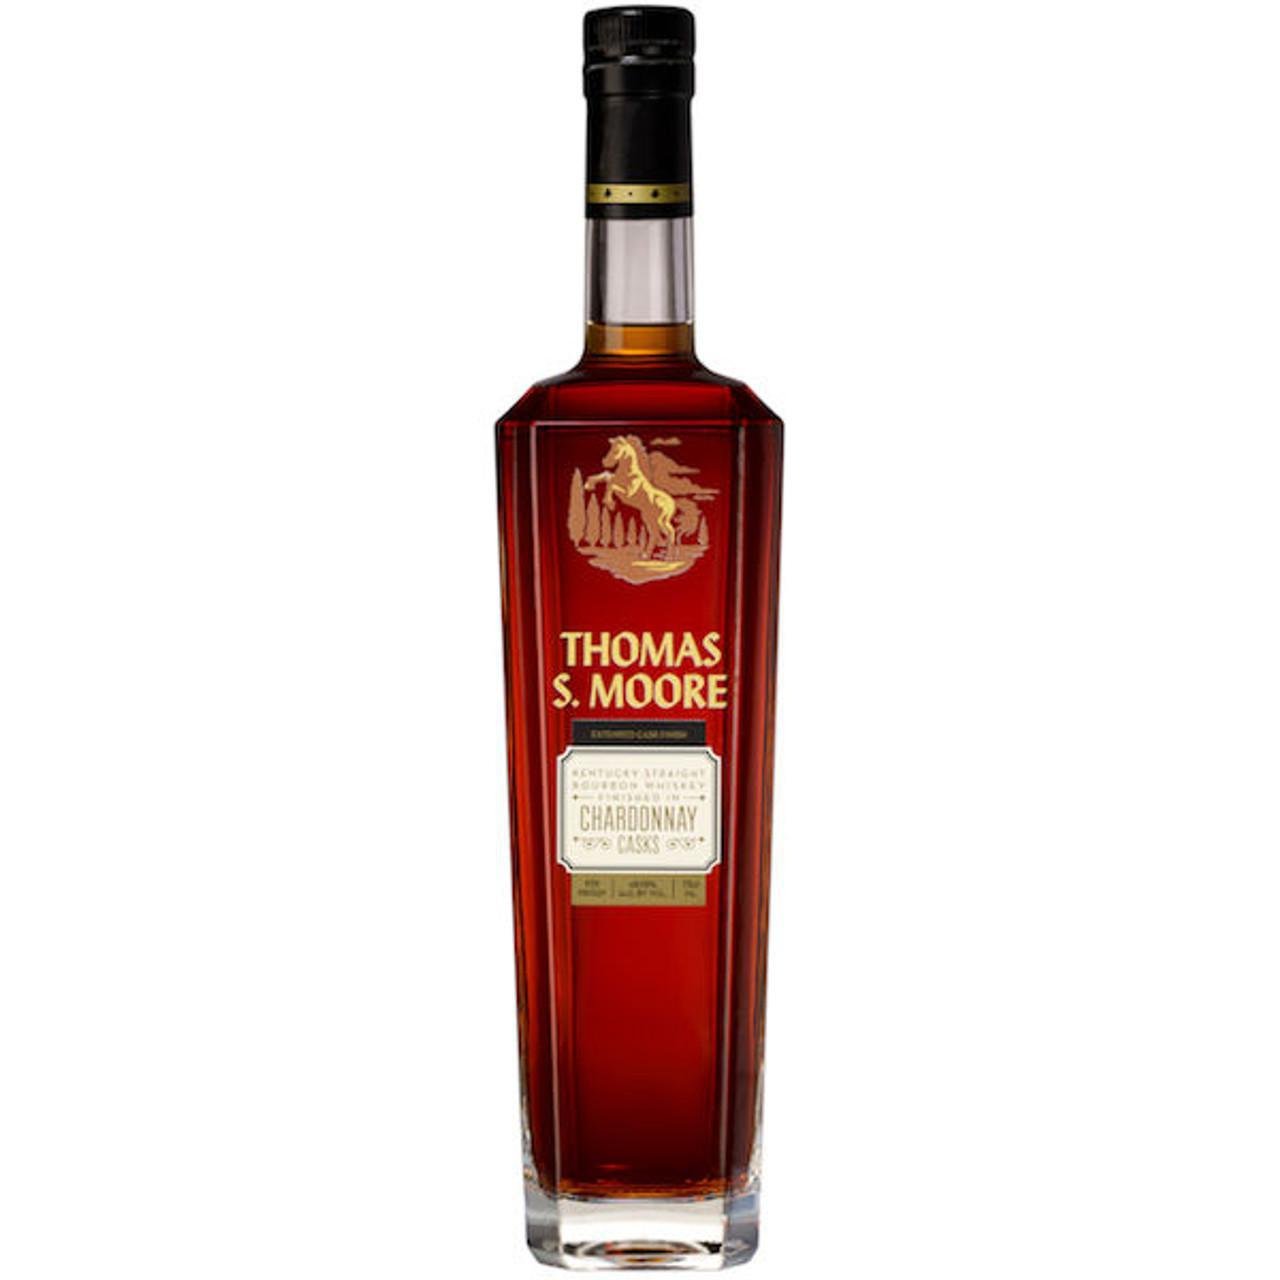 1792 Distillery - 'Thomas S. Moore' Kentucky Bourbon Finished in Chardonnay Casks (750ML) - The Epicurean Trader